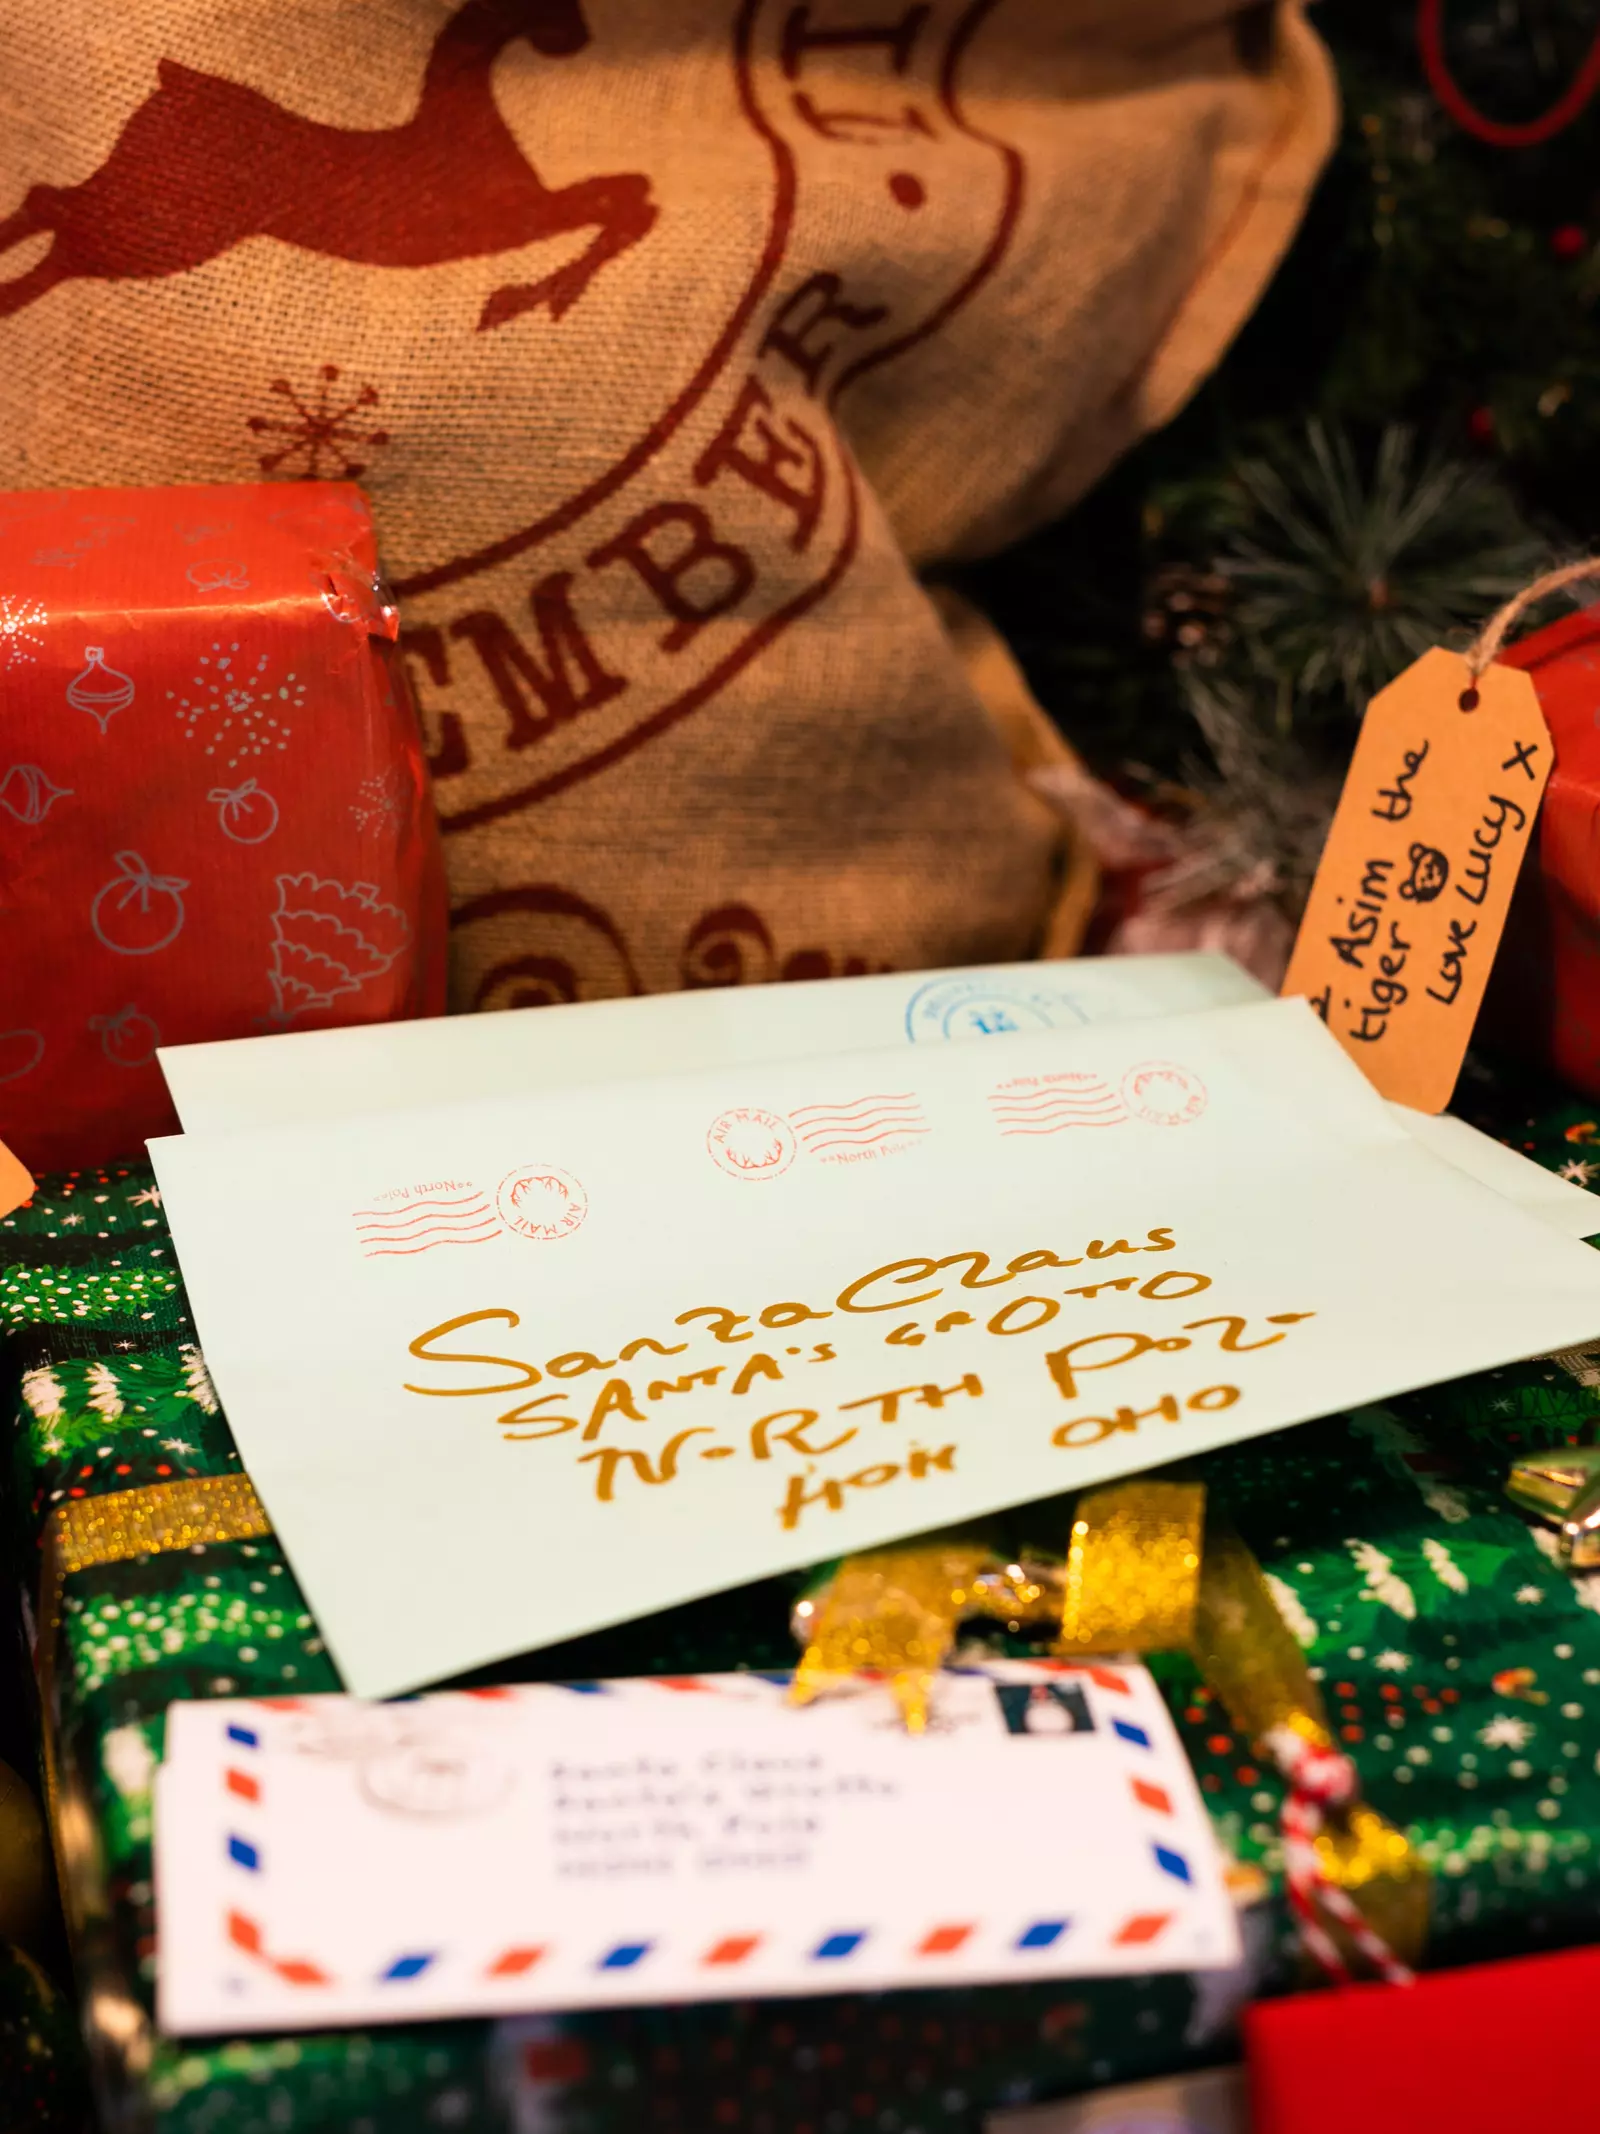 A white letter in the centre of the frame is addressed in gold lettering to Santa Claus at the North Pole. The letter is surround by red and green wrapped Christmas presents and a hessian sack